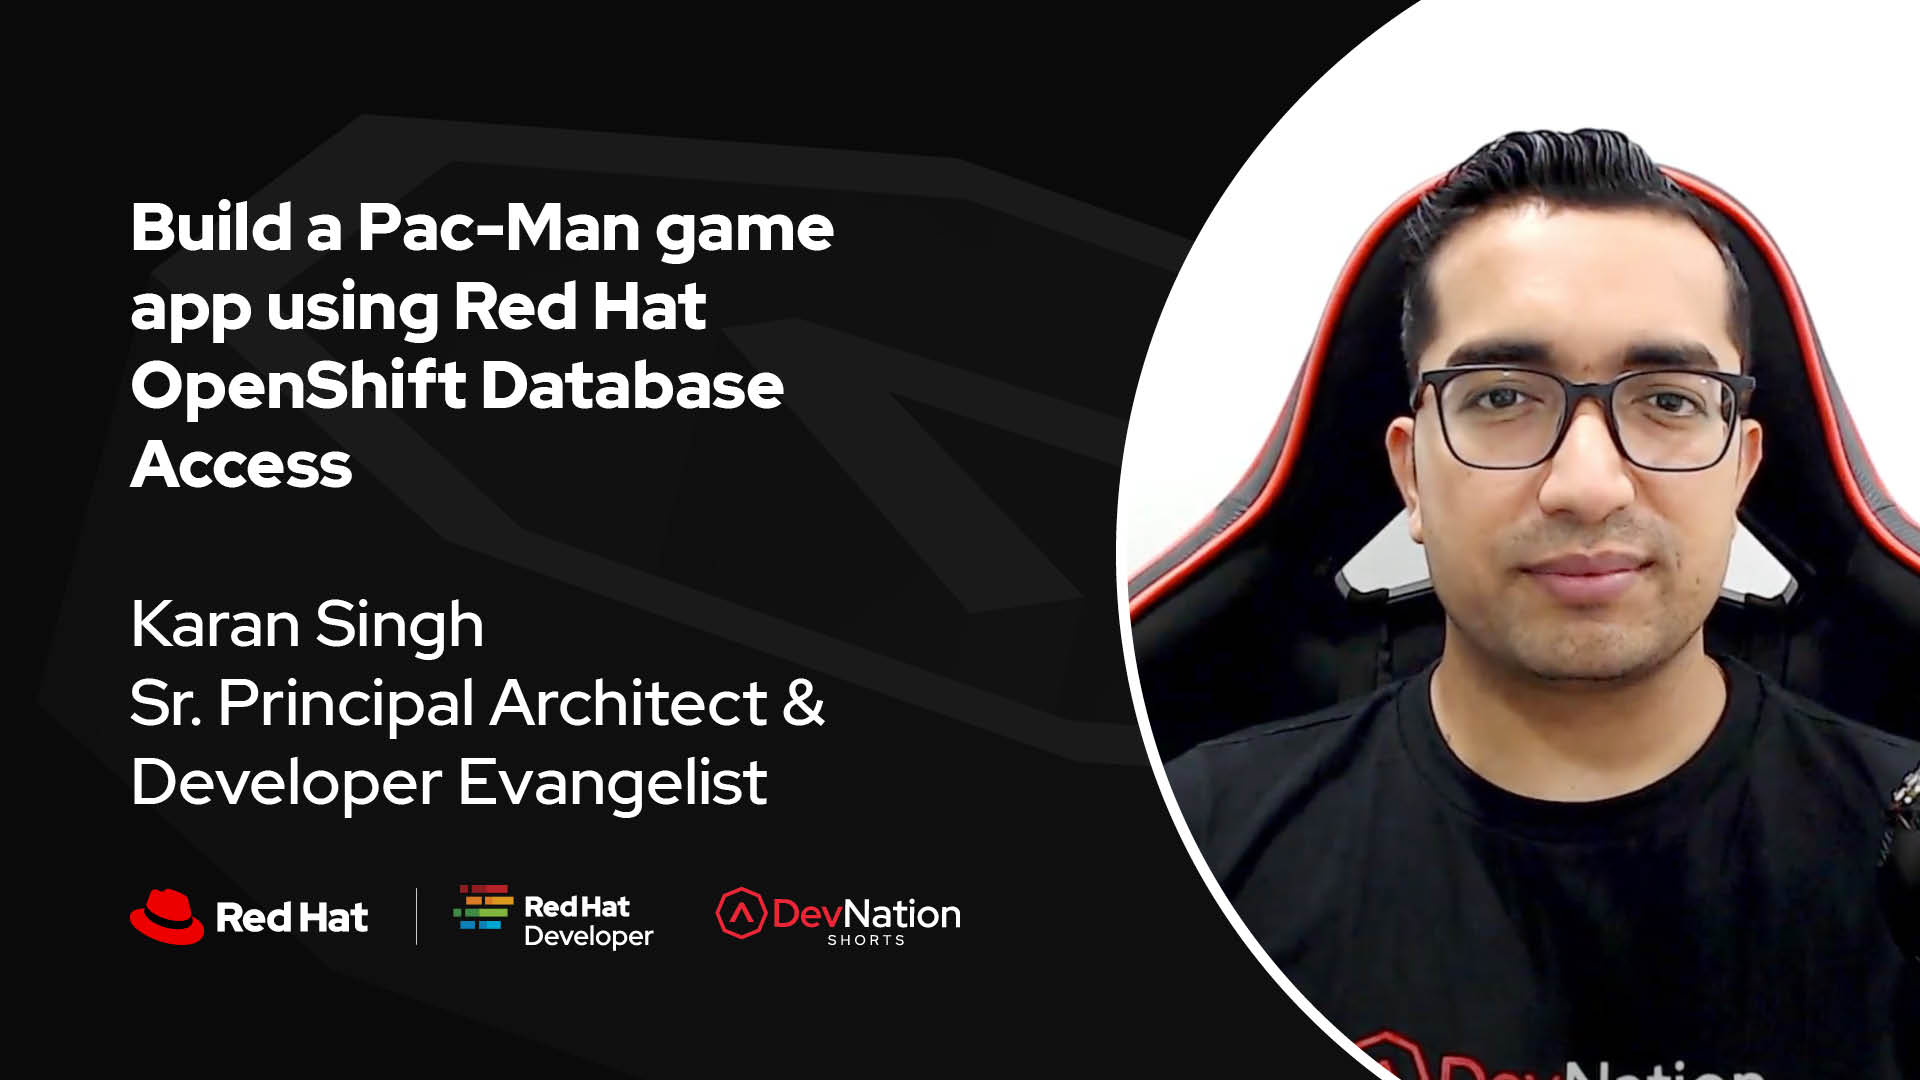 Build a Pac-Man game app using Red Hat OpenShift Database Access